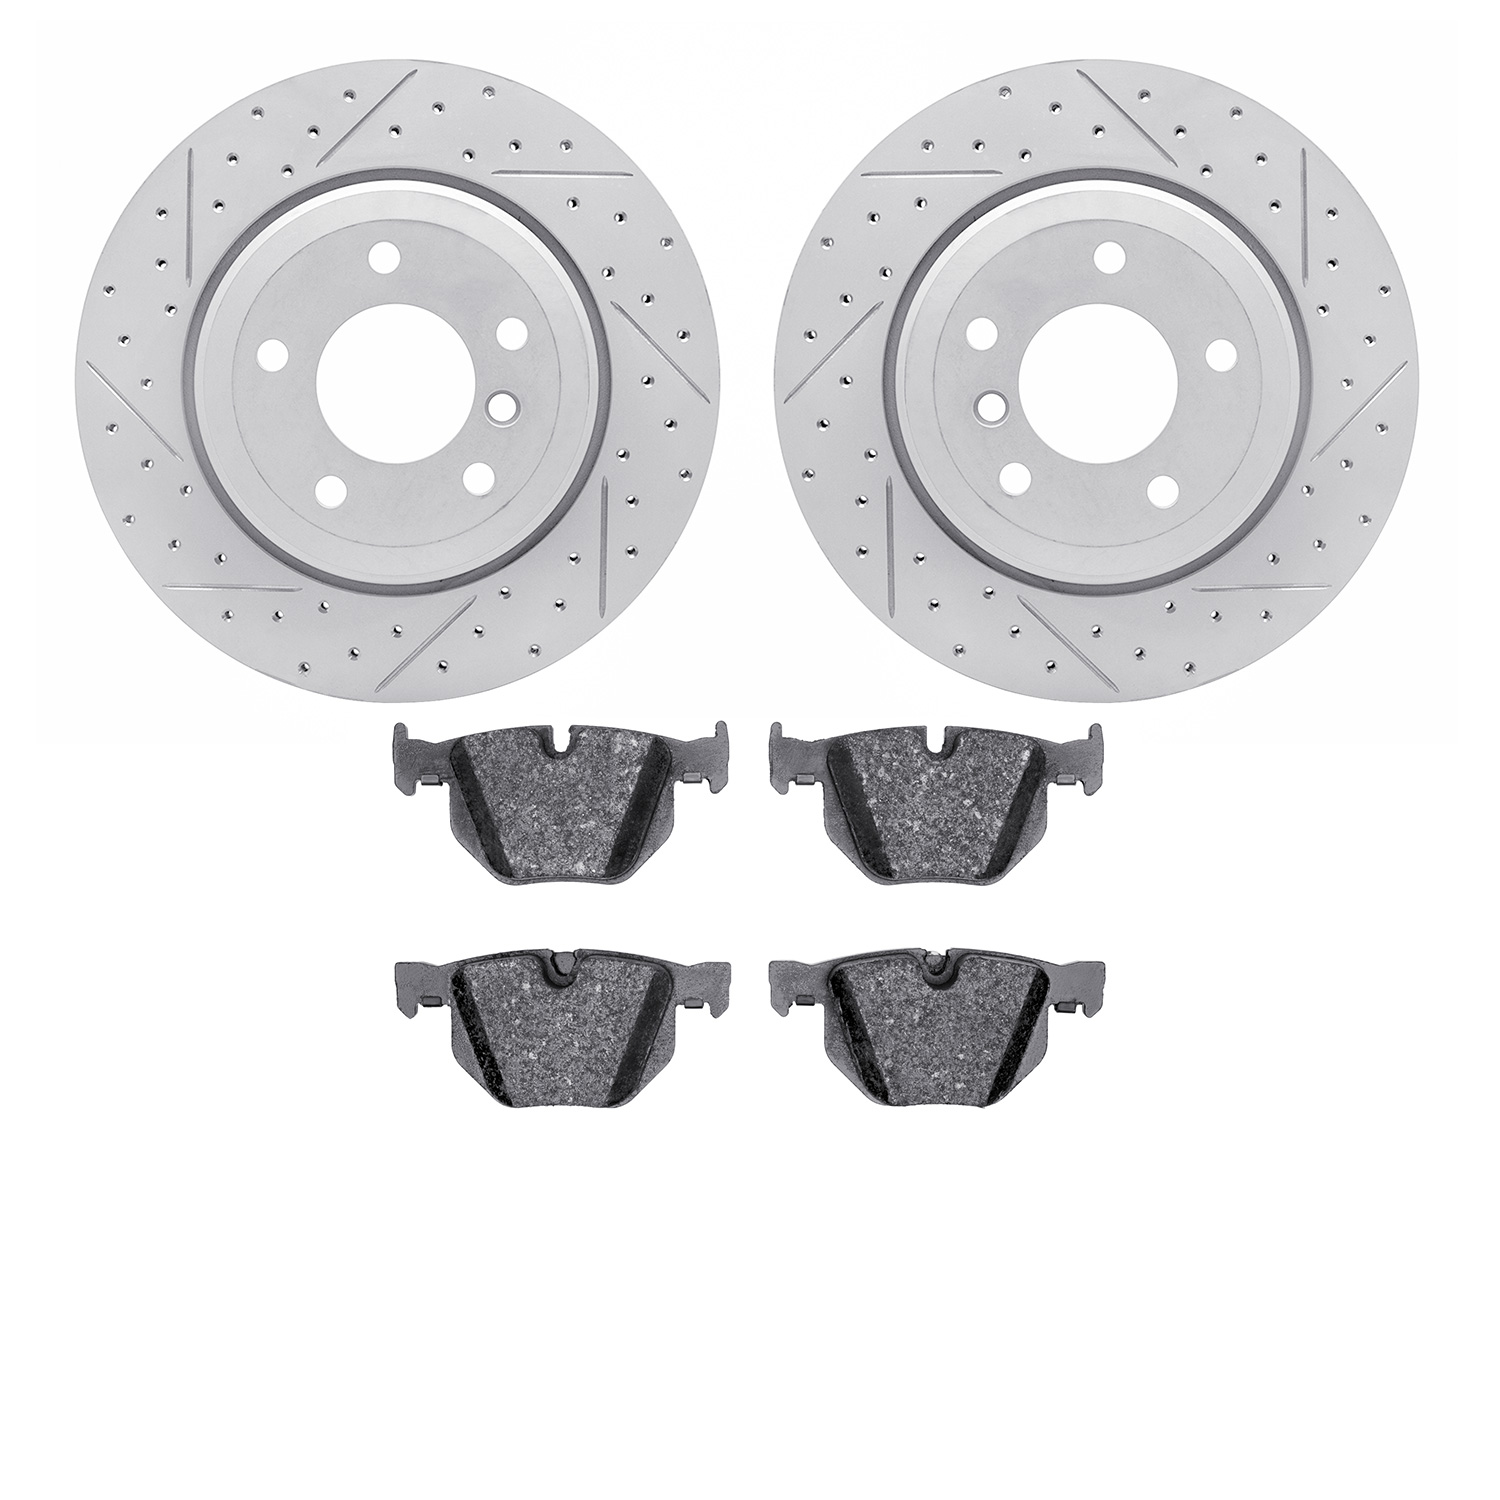 2502-31049 Geoperformance Drilled/Slotted Rotors w/5000 Advanced Brake Pads Kit, 2004-2010 BMW, Position: Rear